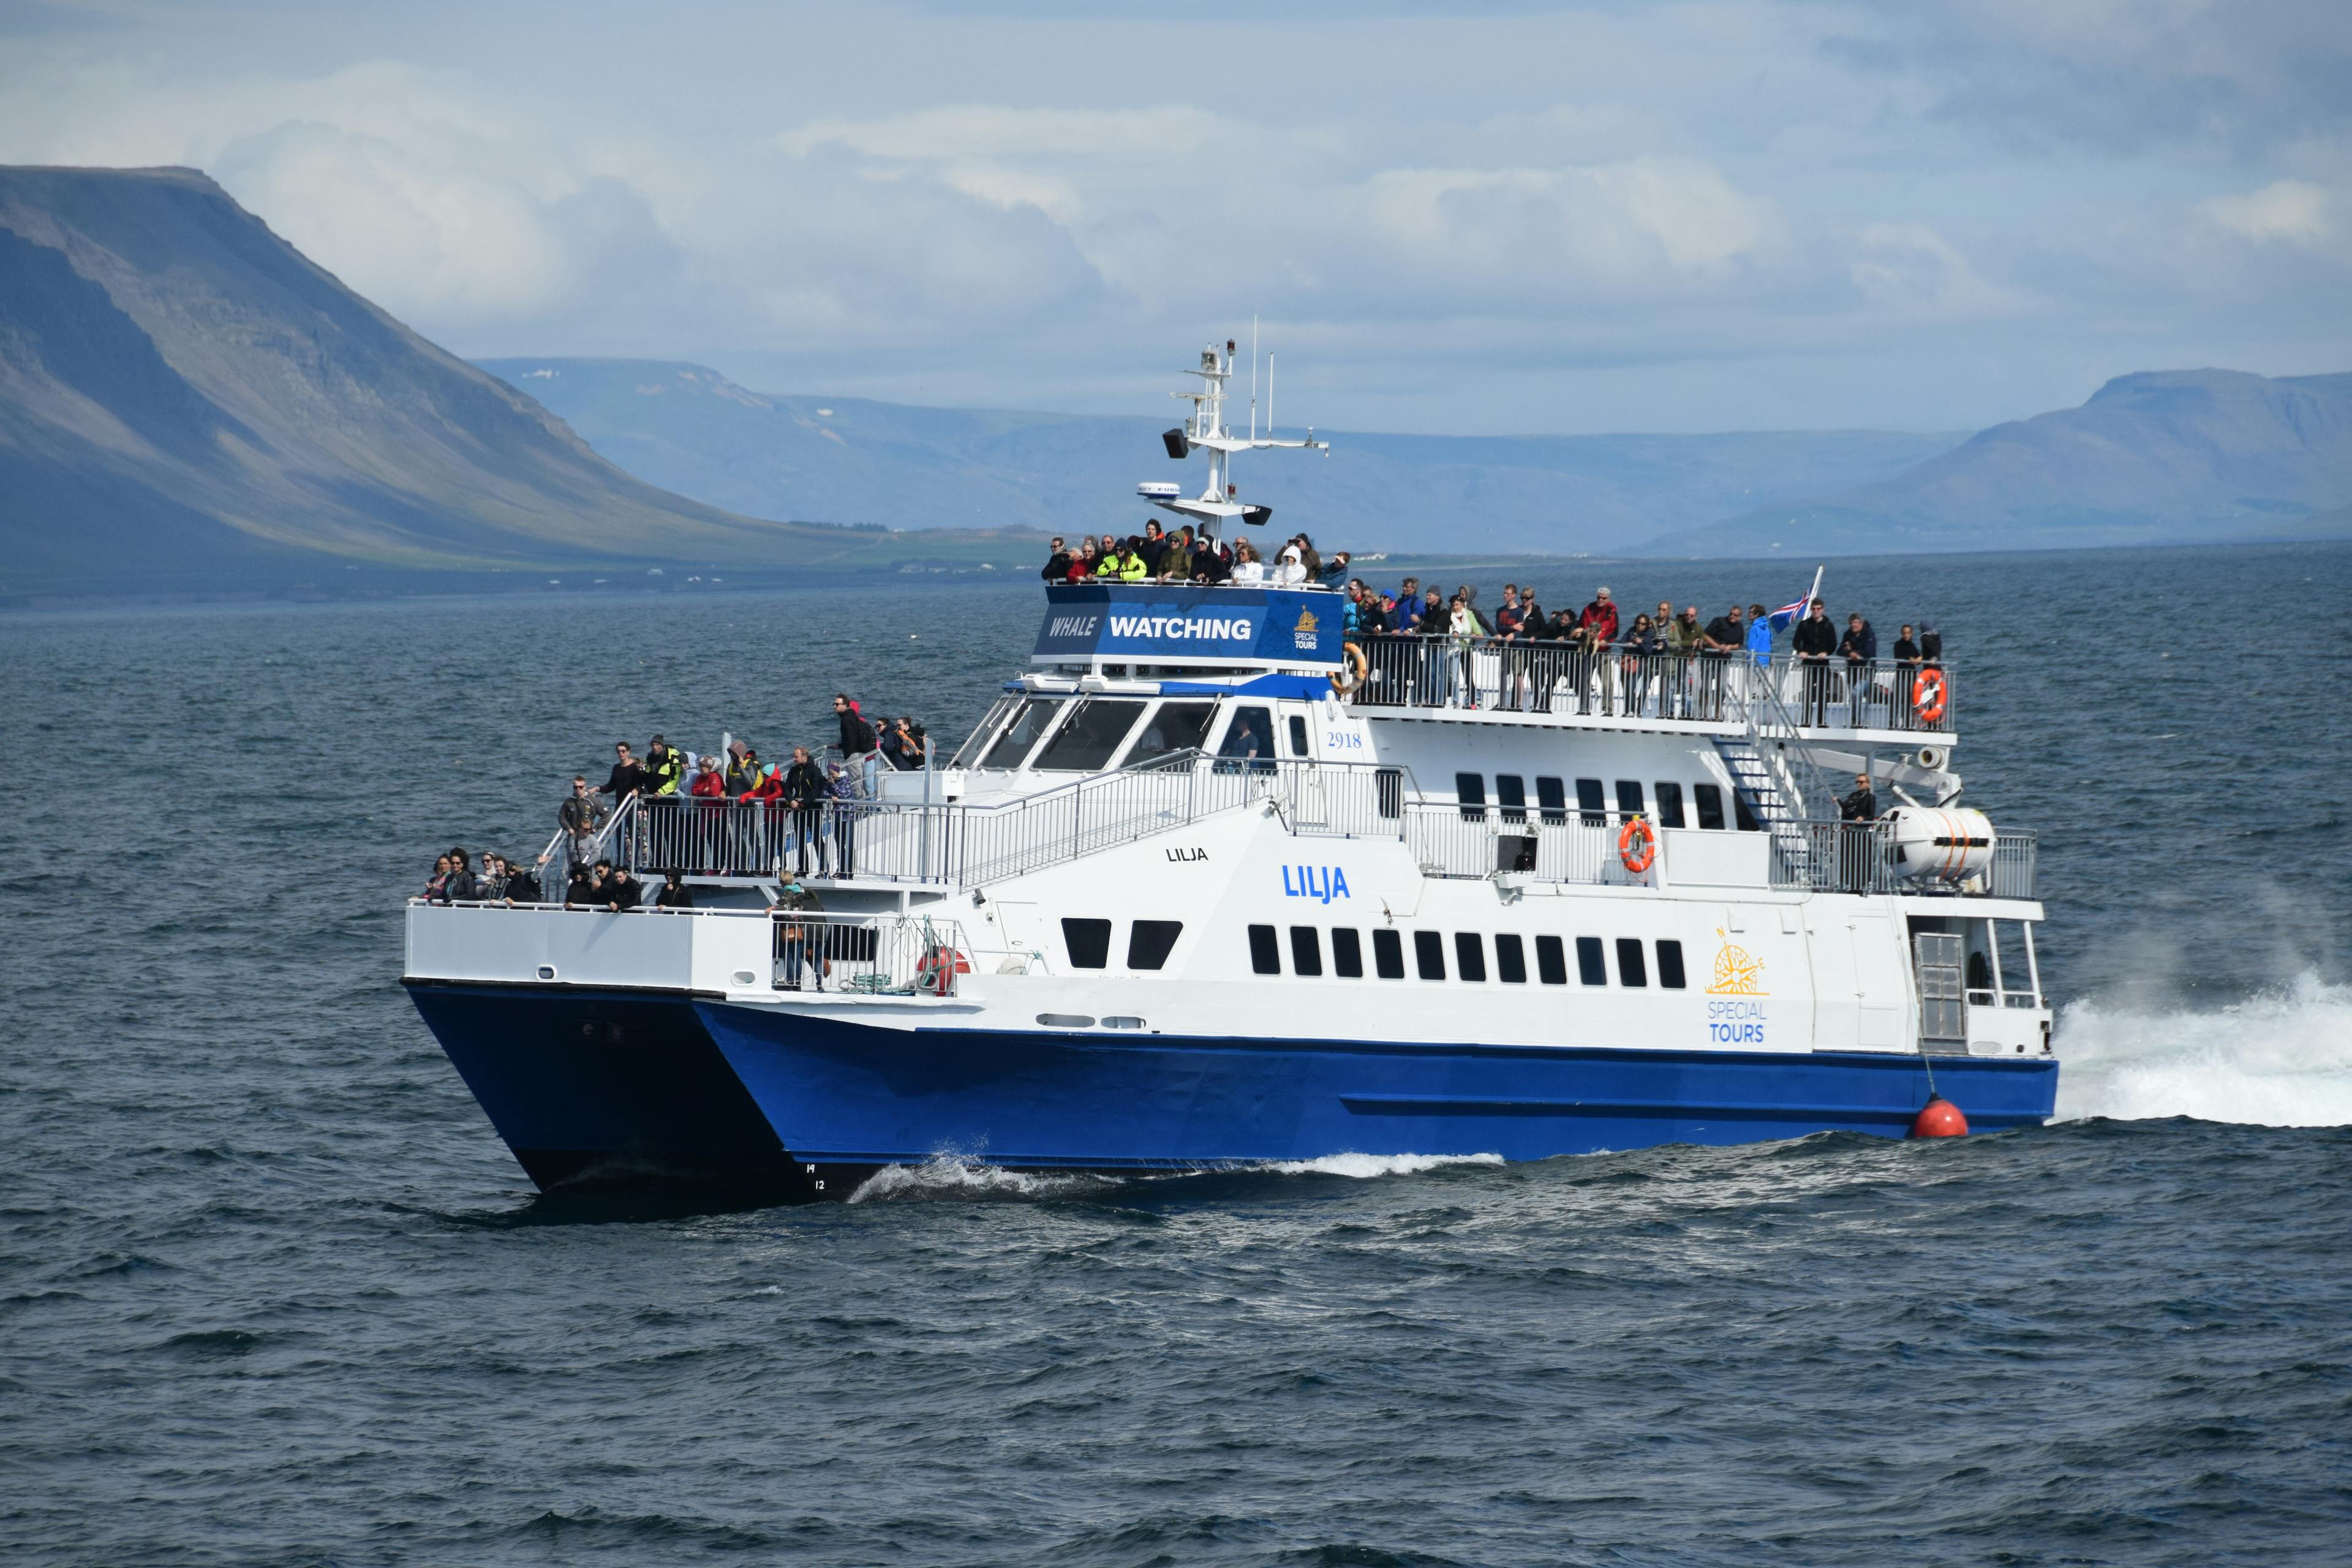 Whale watching express